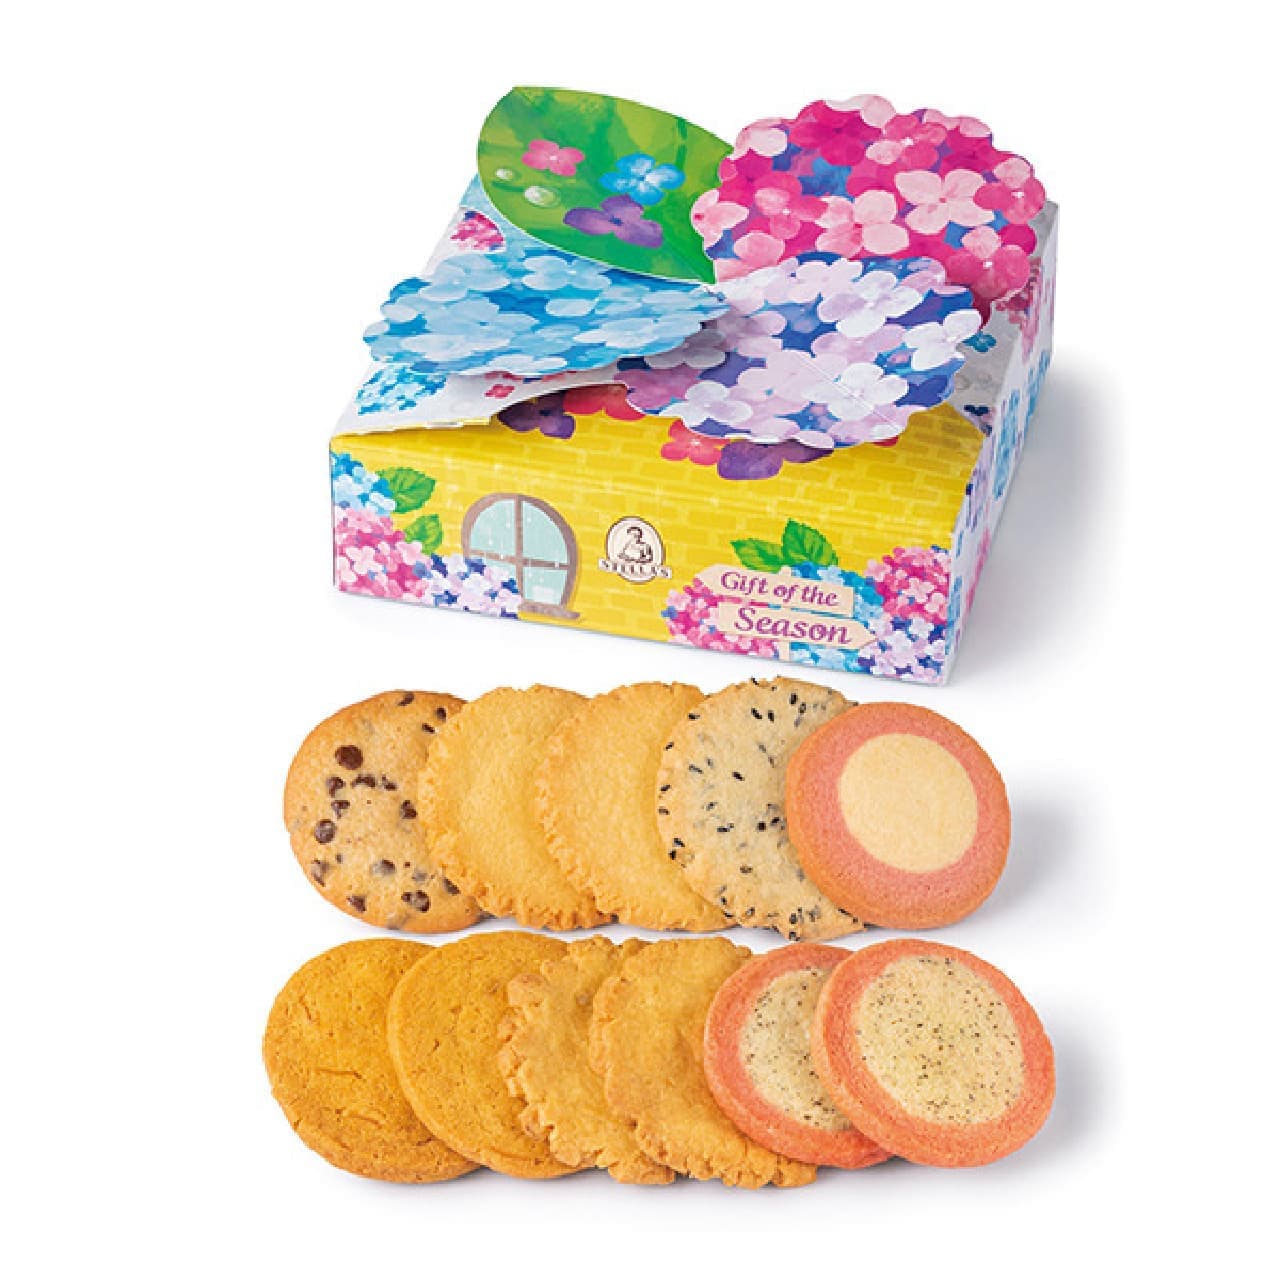 Antostella] Perfect for small summer gifts! Featured Cookie Gifts for Gift Giving